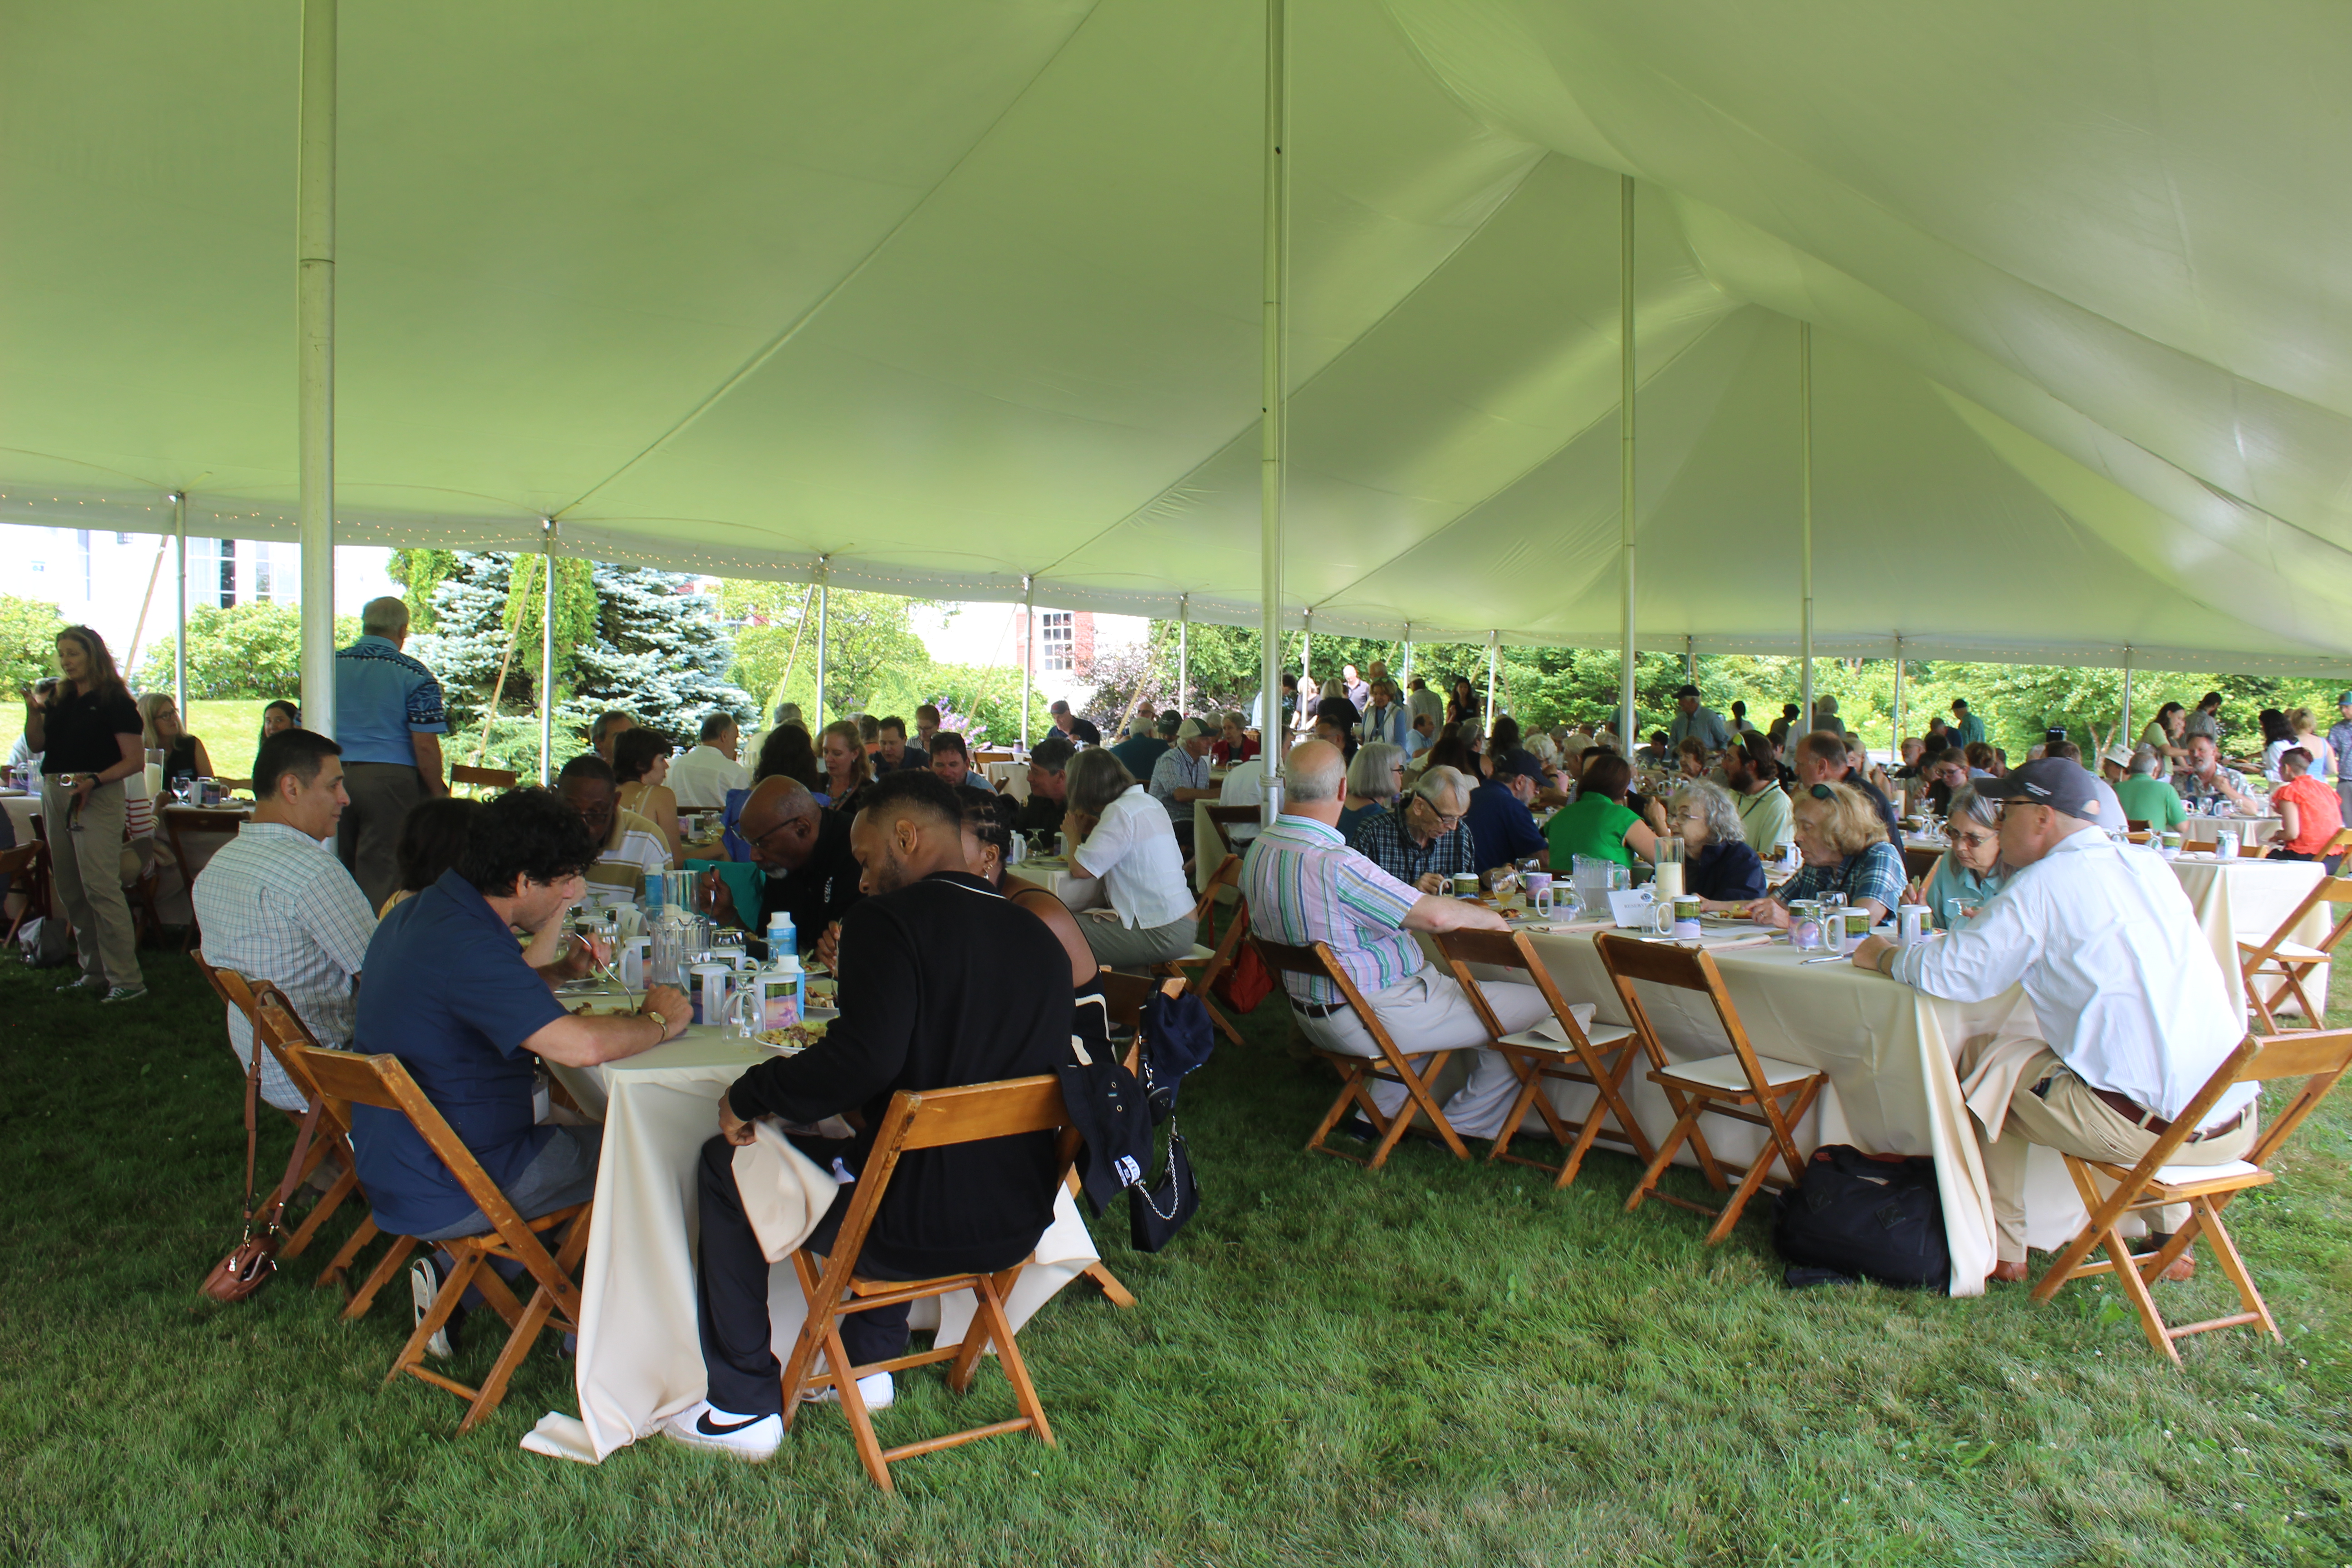 A large crowd enjoys lunch under the tent at Heaven Hill